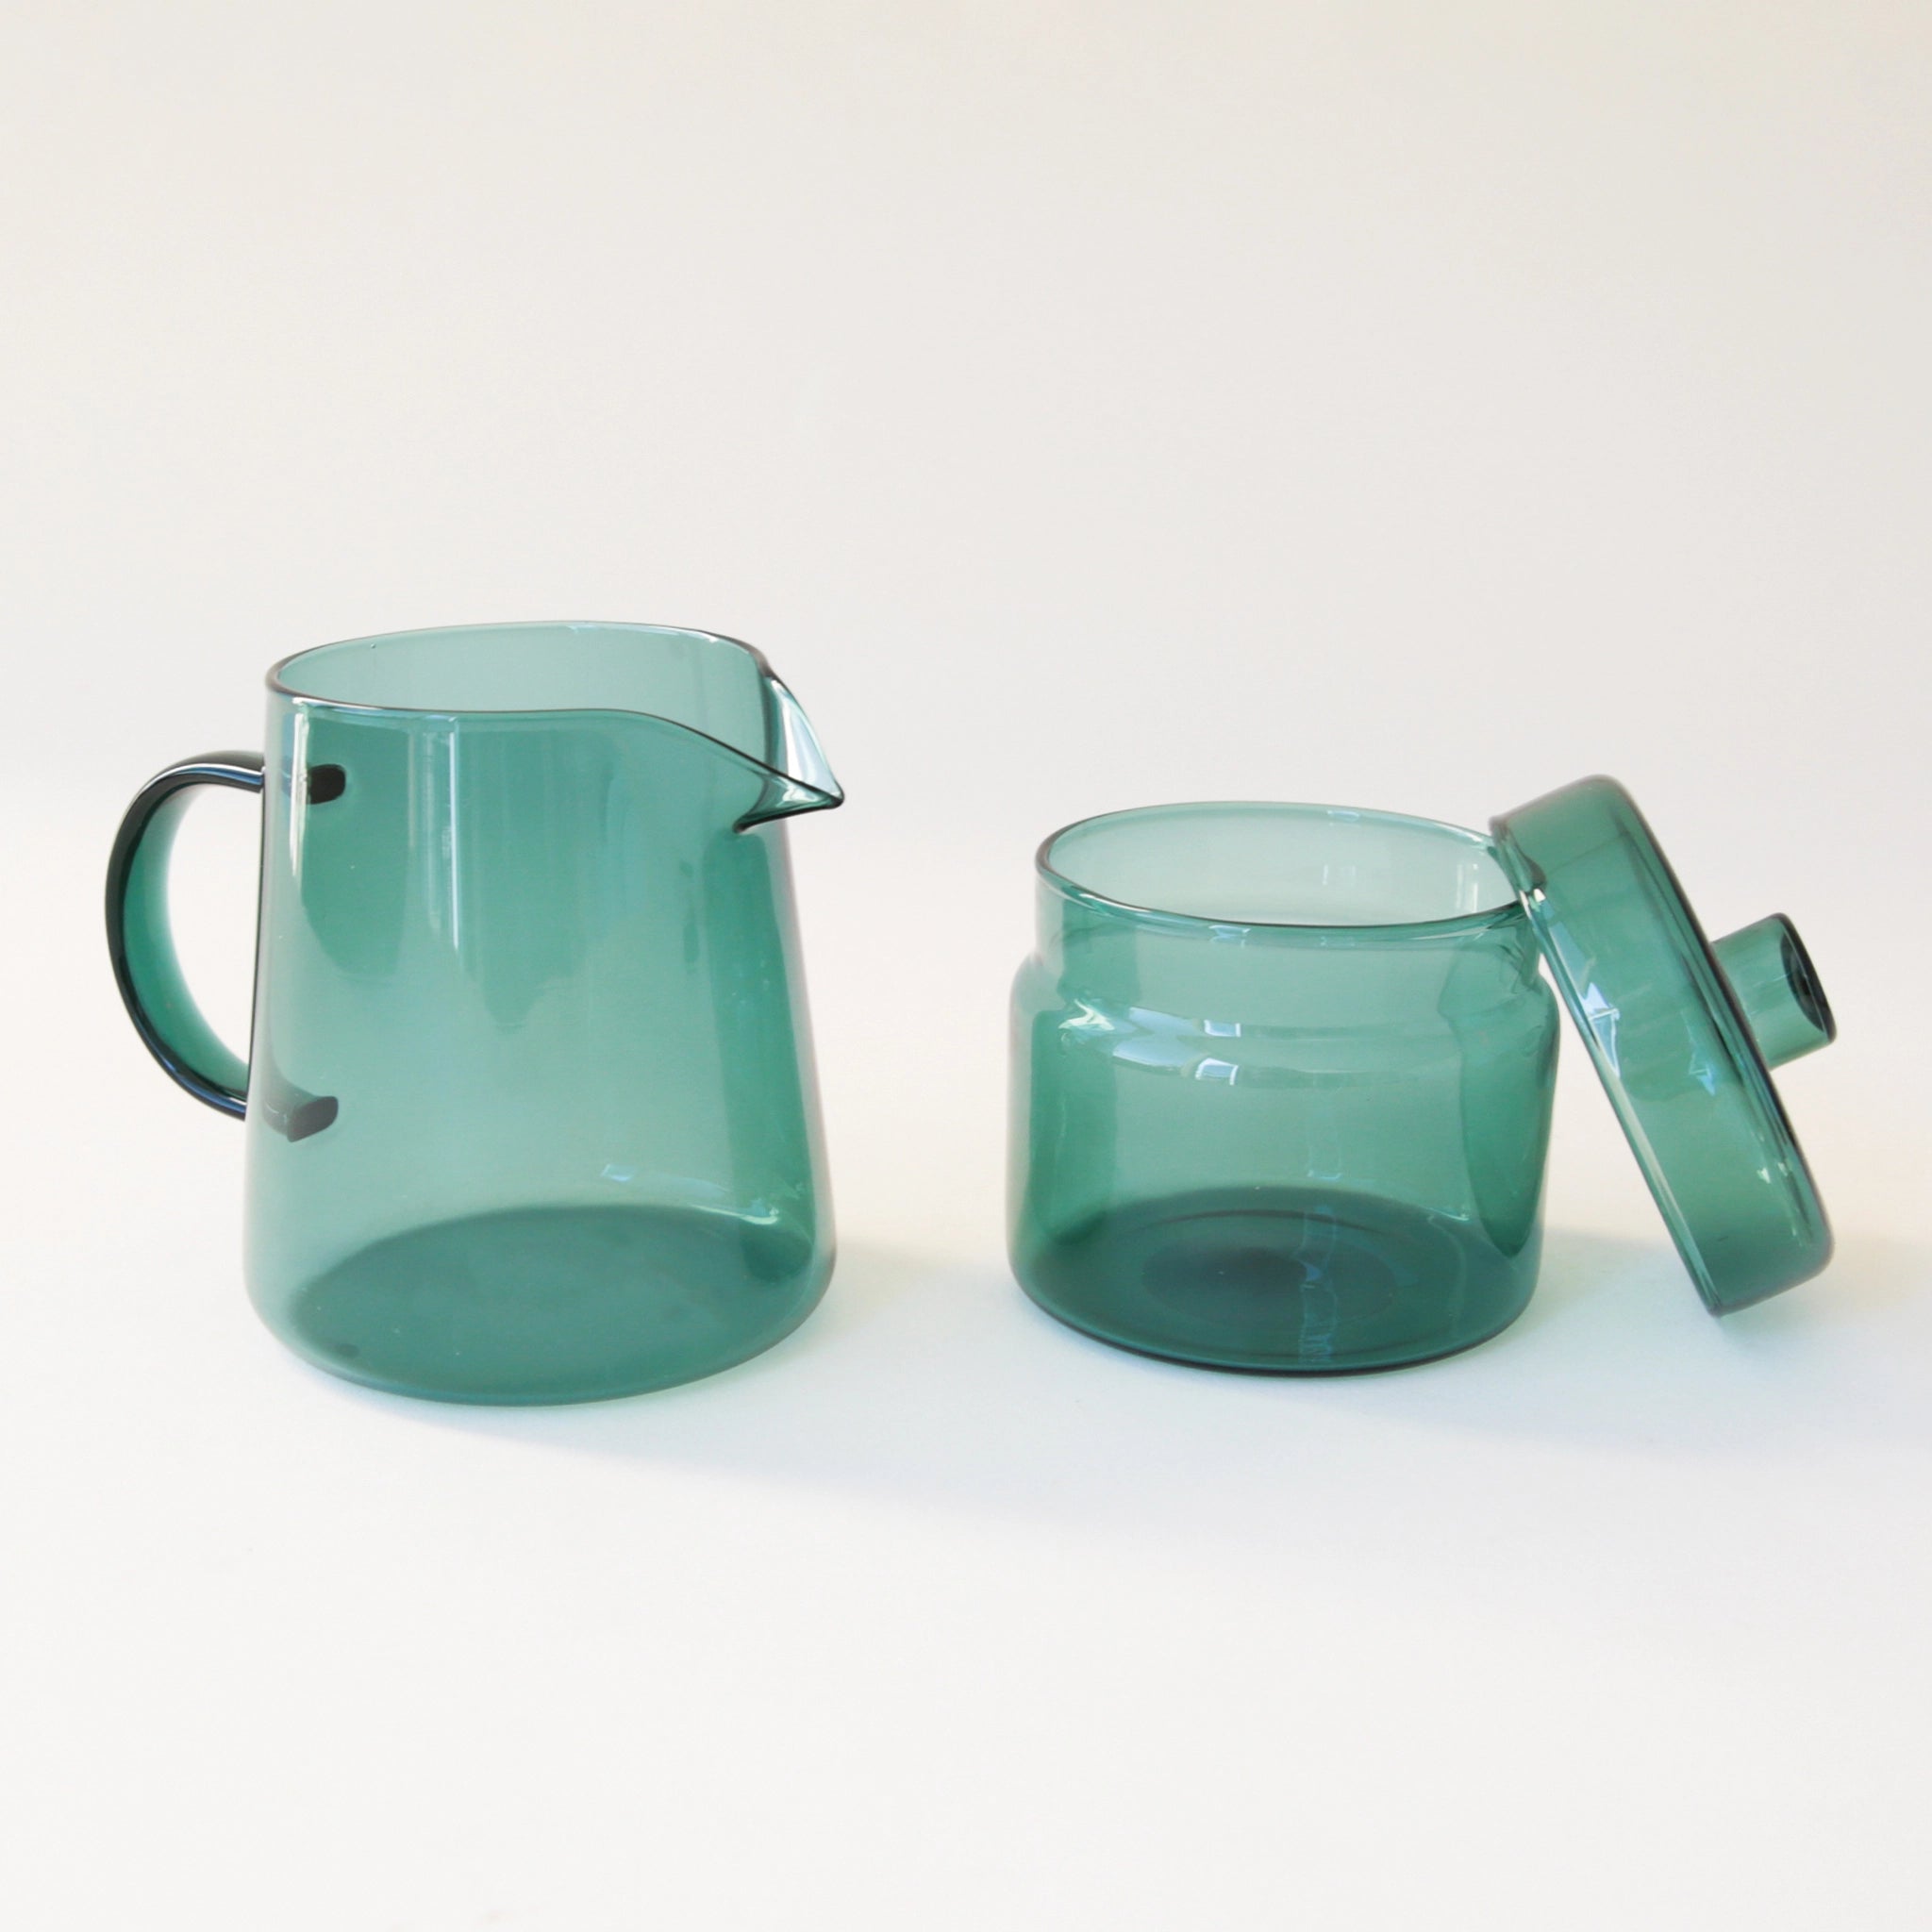 A round glass teal jar with a coordinating glass lid and a round but flat knob on top photographed here besides a matching teal pitcher.